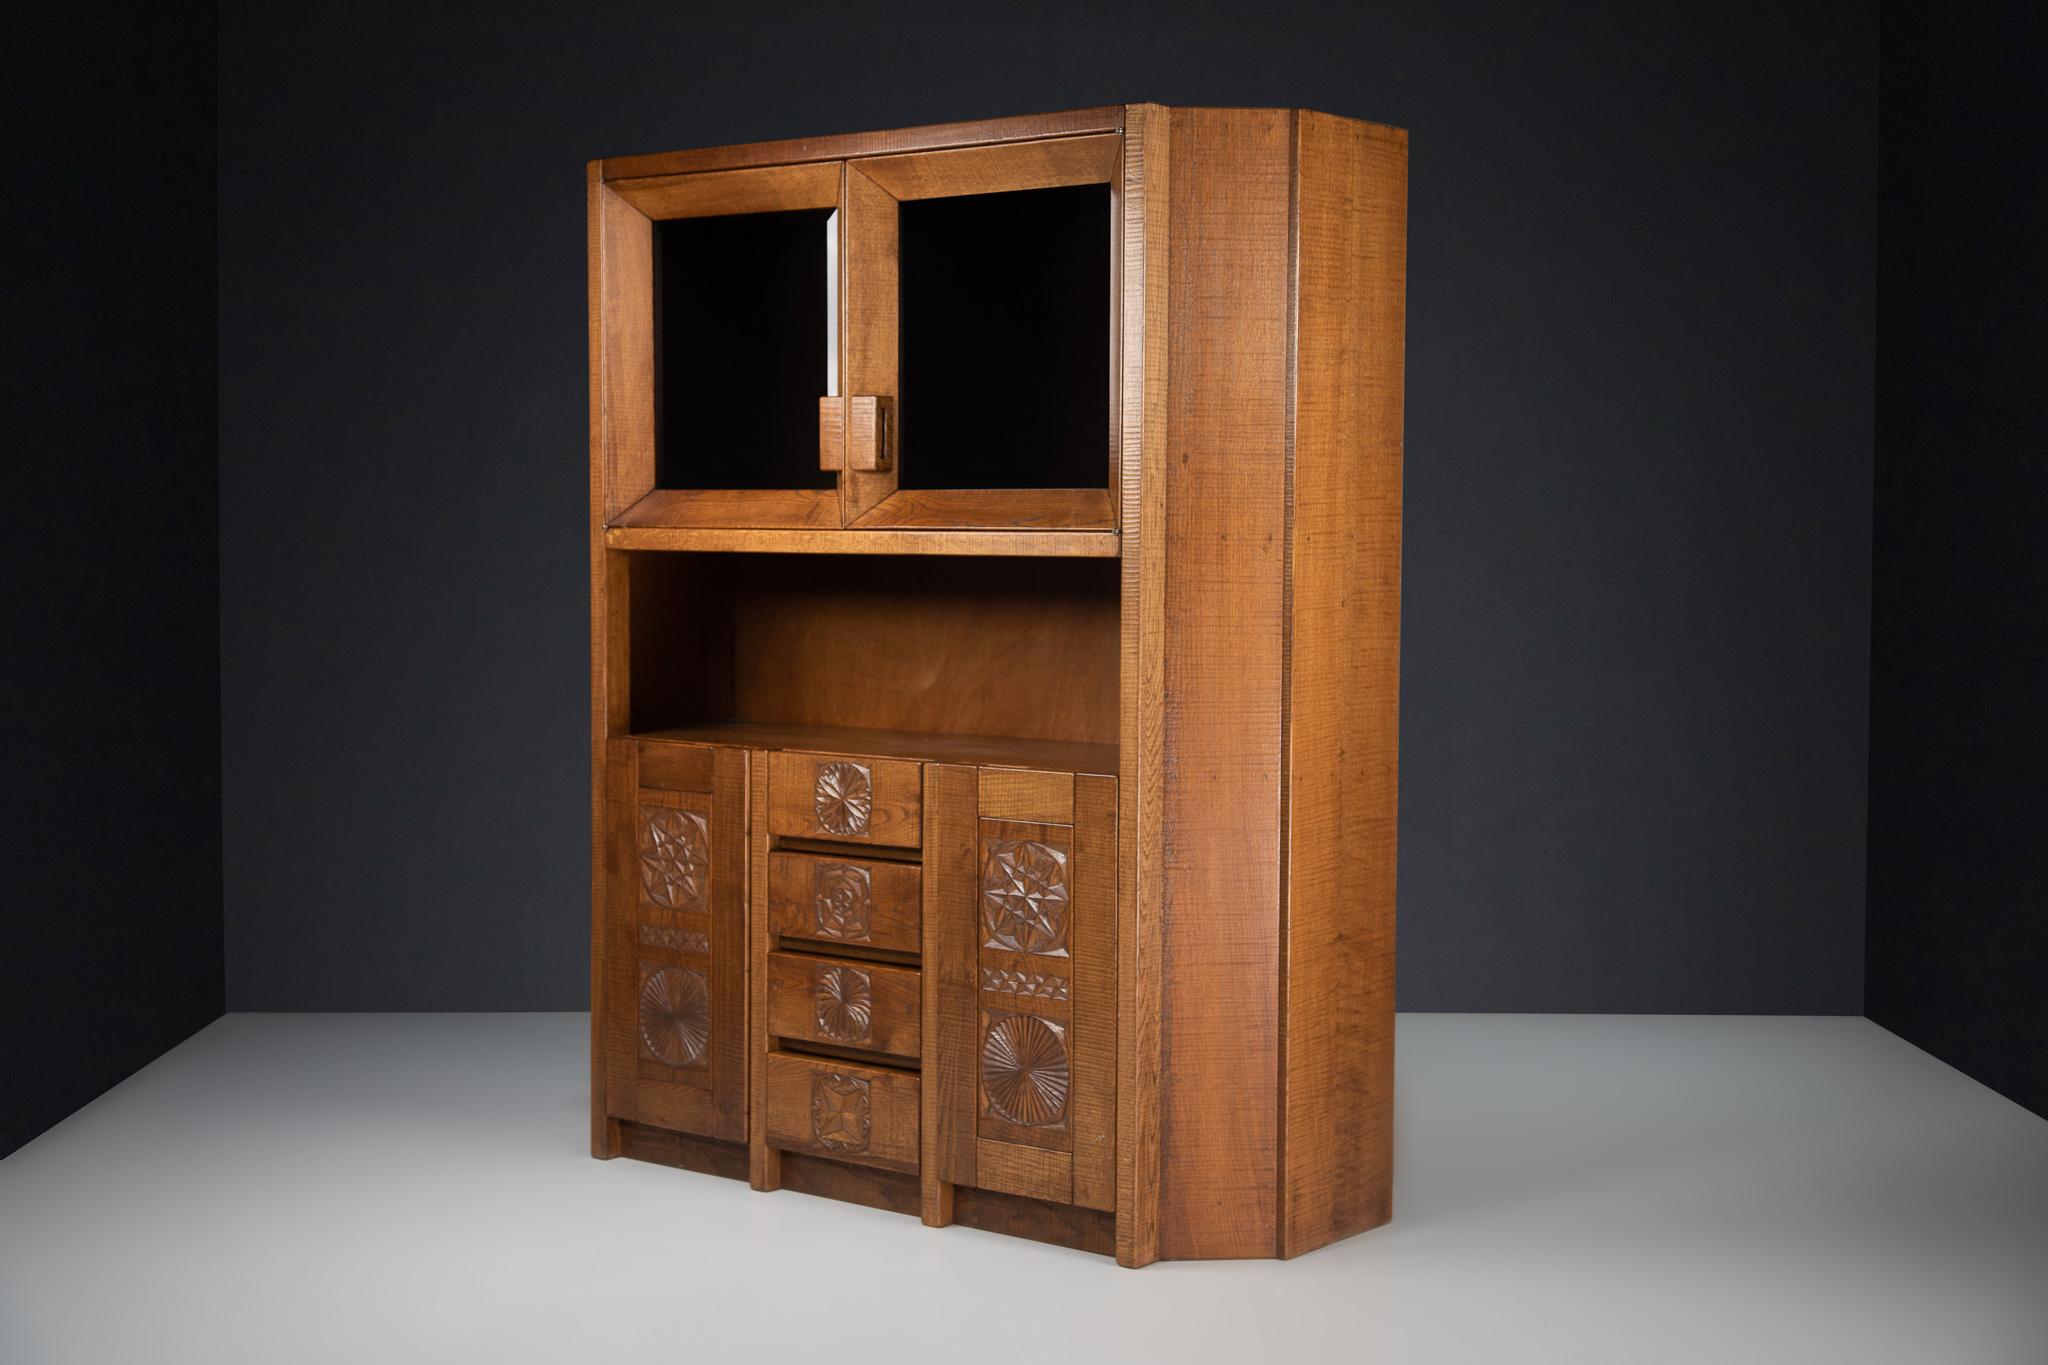 Hand crafted Brutalist Giuseppe Rivadossi glazed cabinet in oak Italy, the 1970s.

A superb oak glazed cabinet by the Italian sculptor and designer Giuseppe Rivadossi, featuring a high level of craftsmanship in woodwork. The lower part has